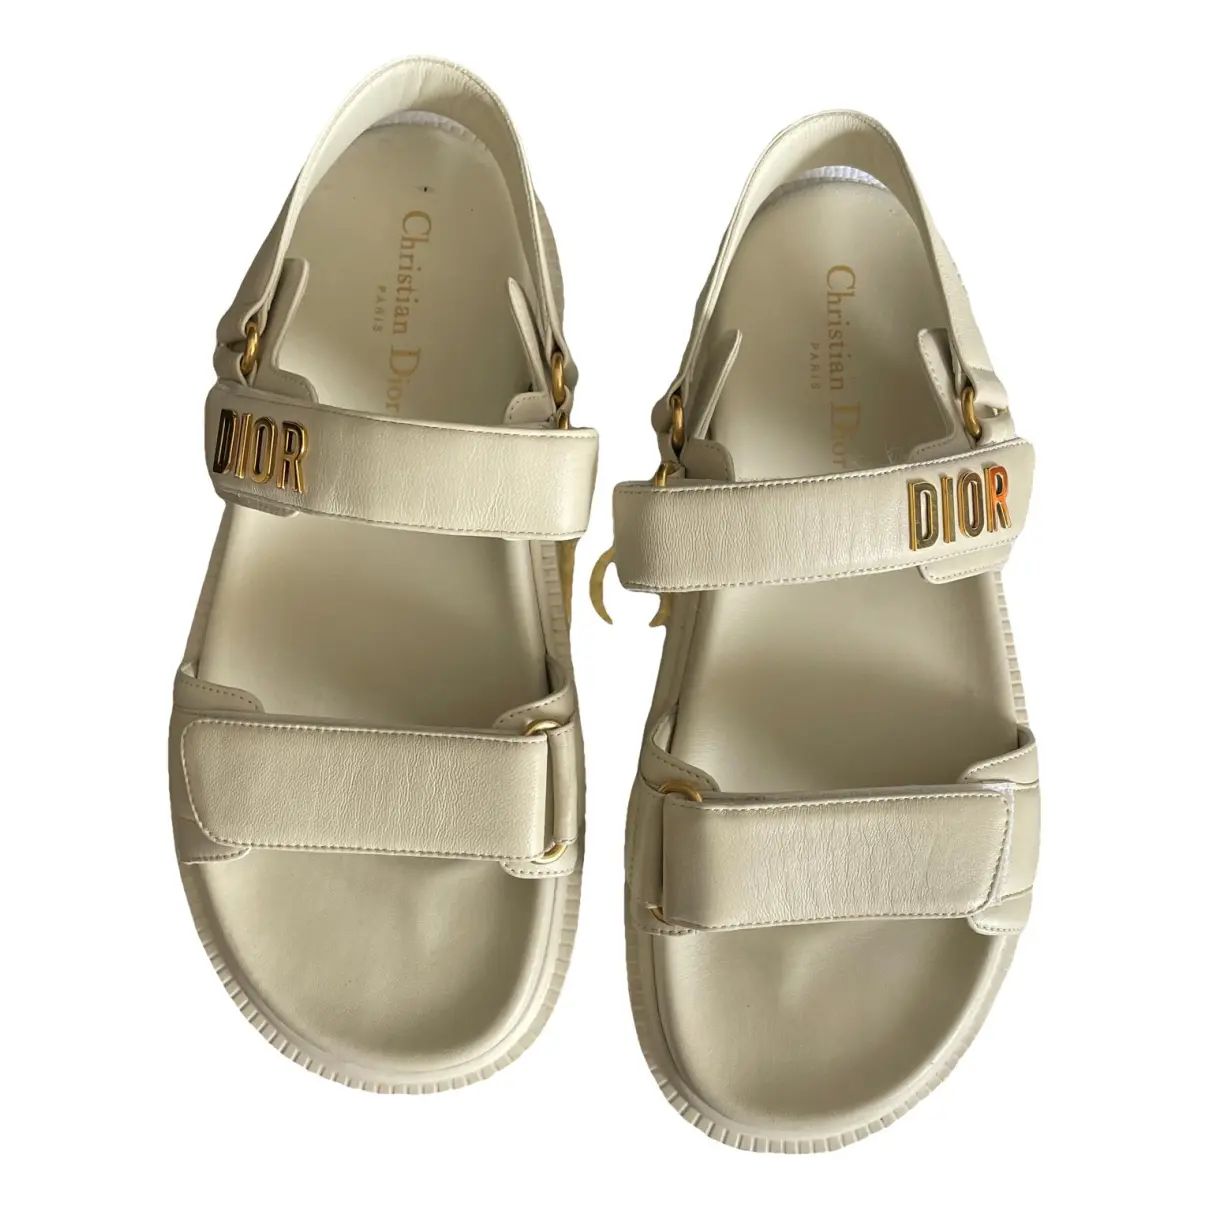 Dioract leather sandal Dior Beige size 40 EU in Leather - 42950269 | Vestiaire Collective (Global)